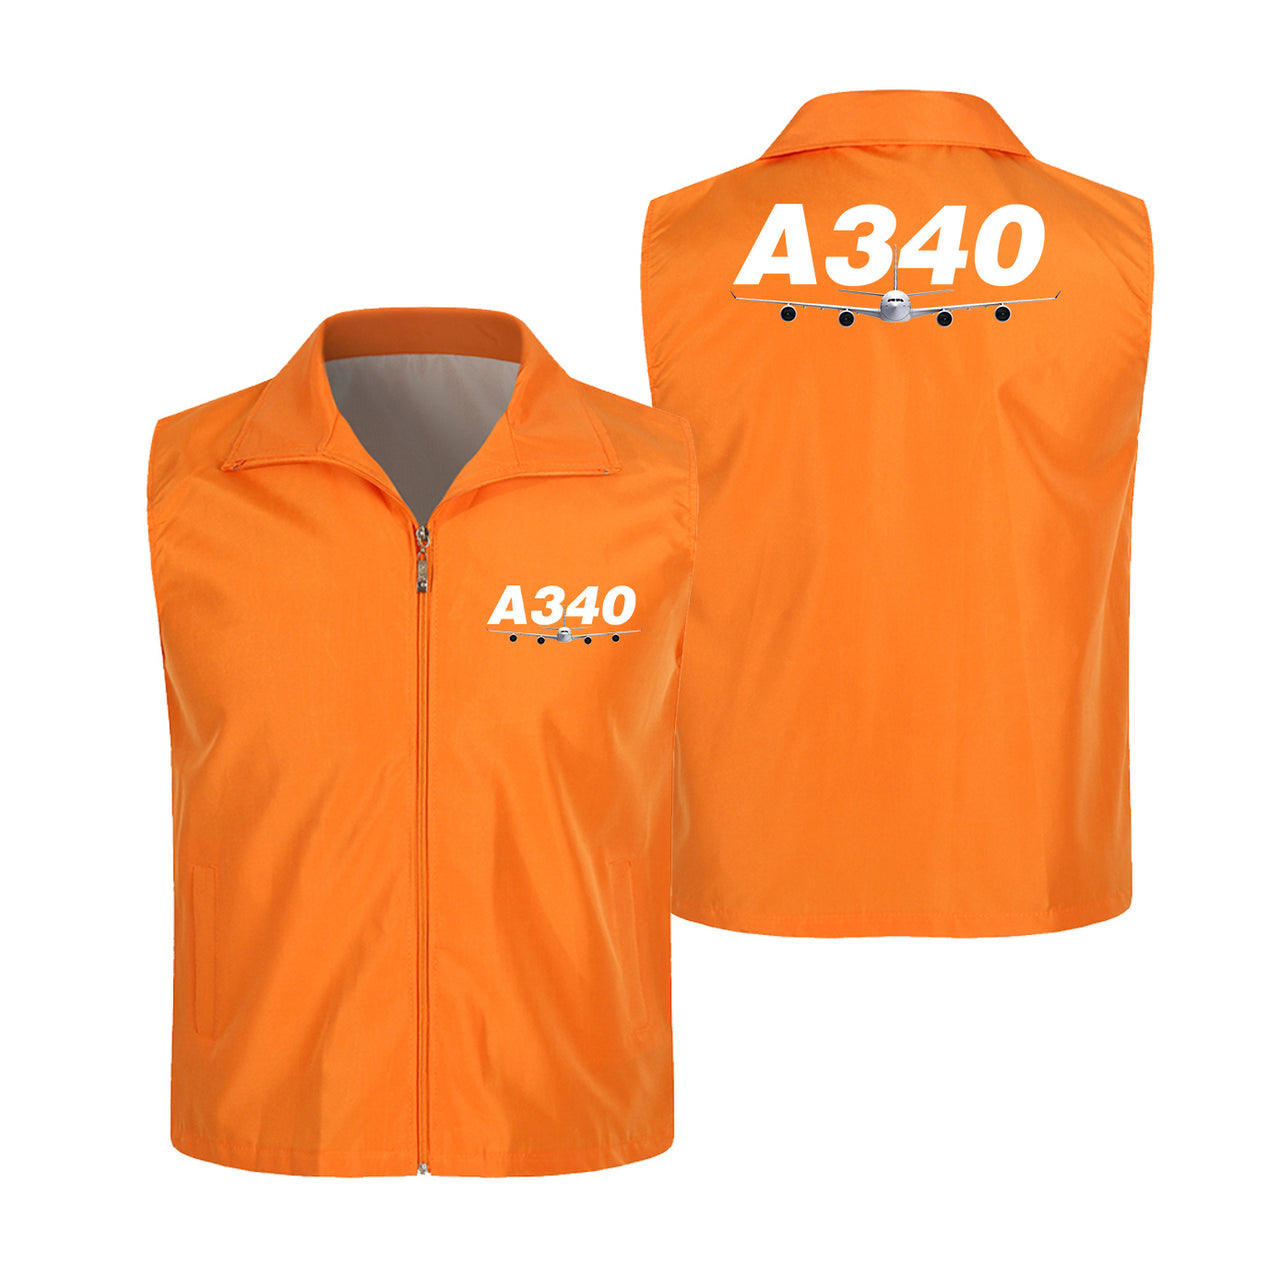 Super Airbus A340 Designed Thin Style Vests